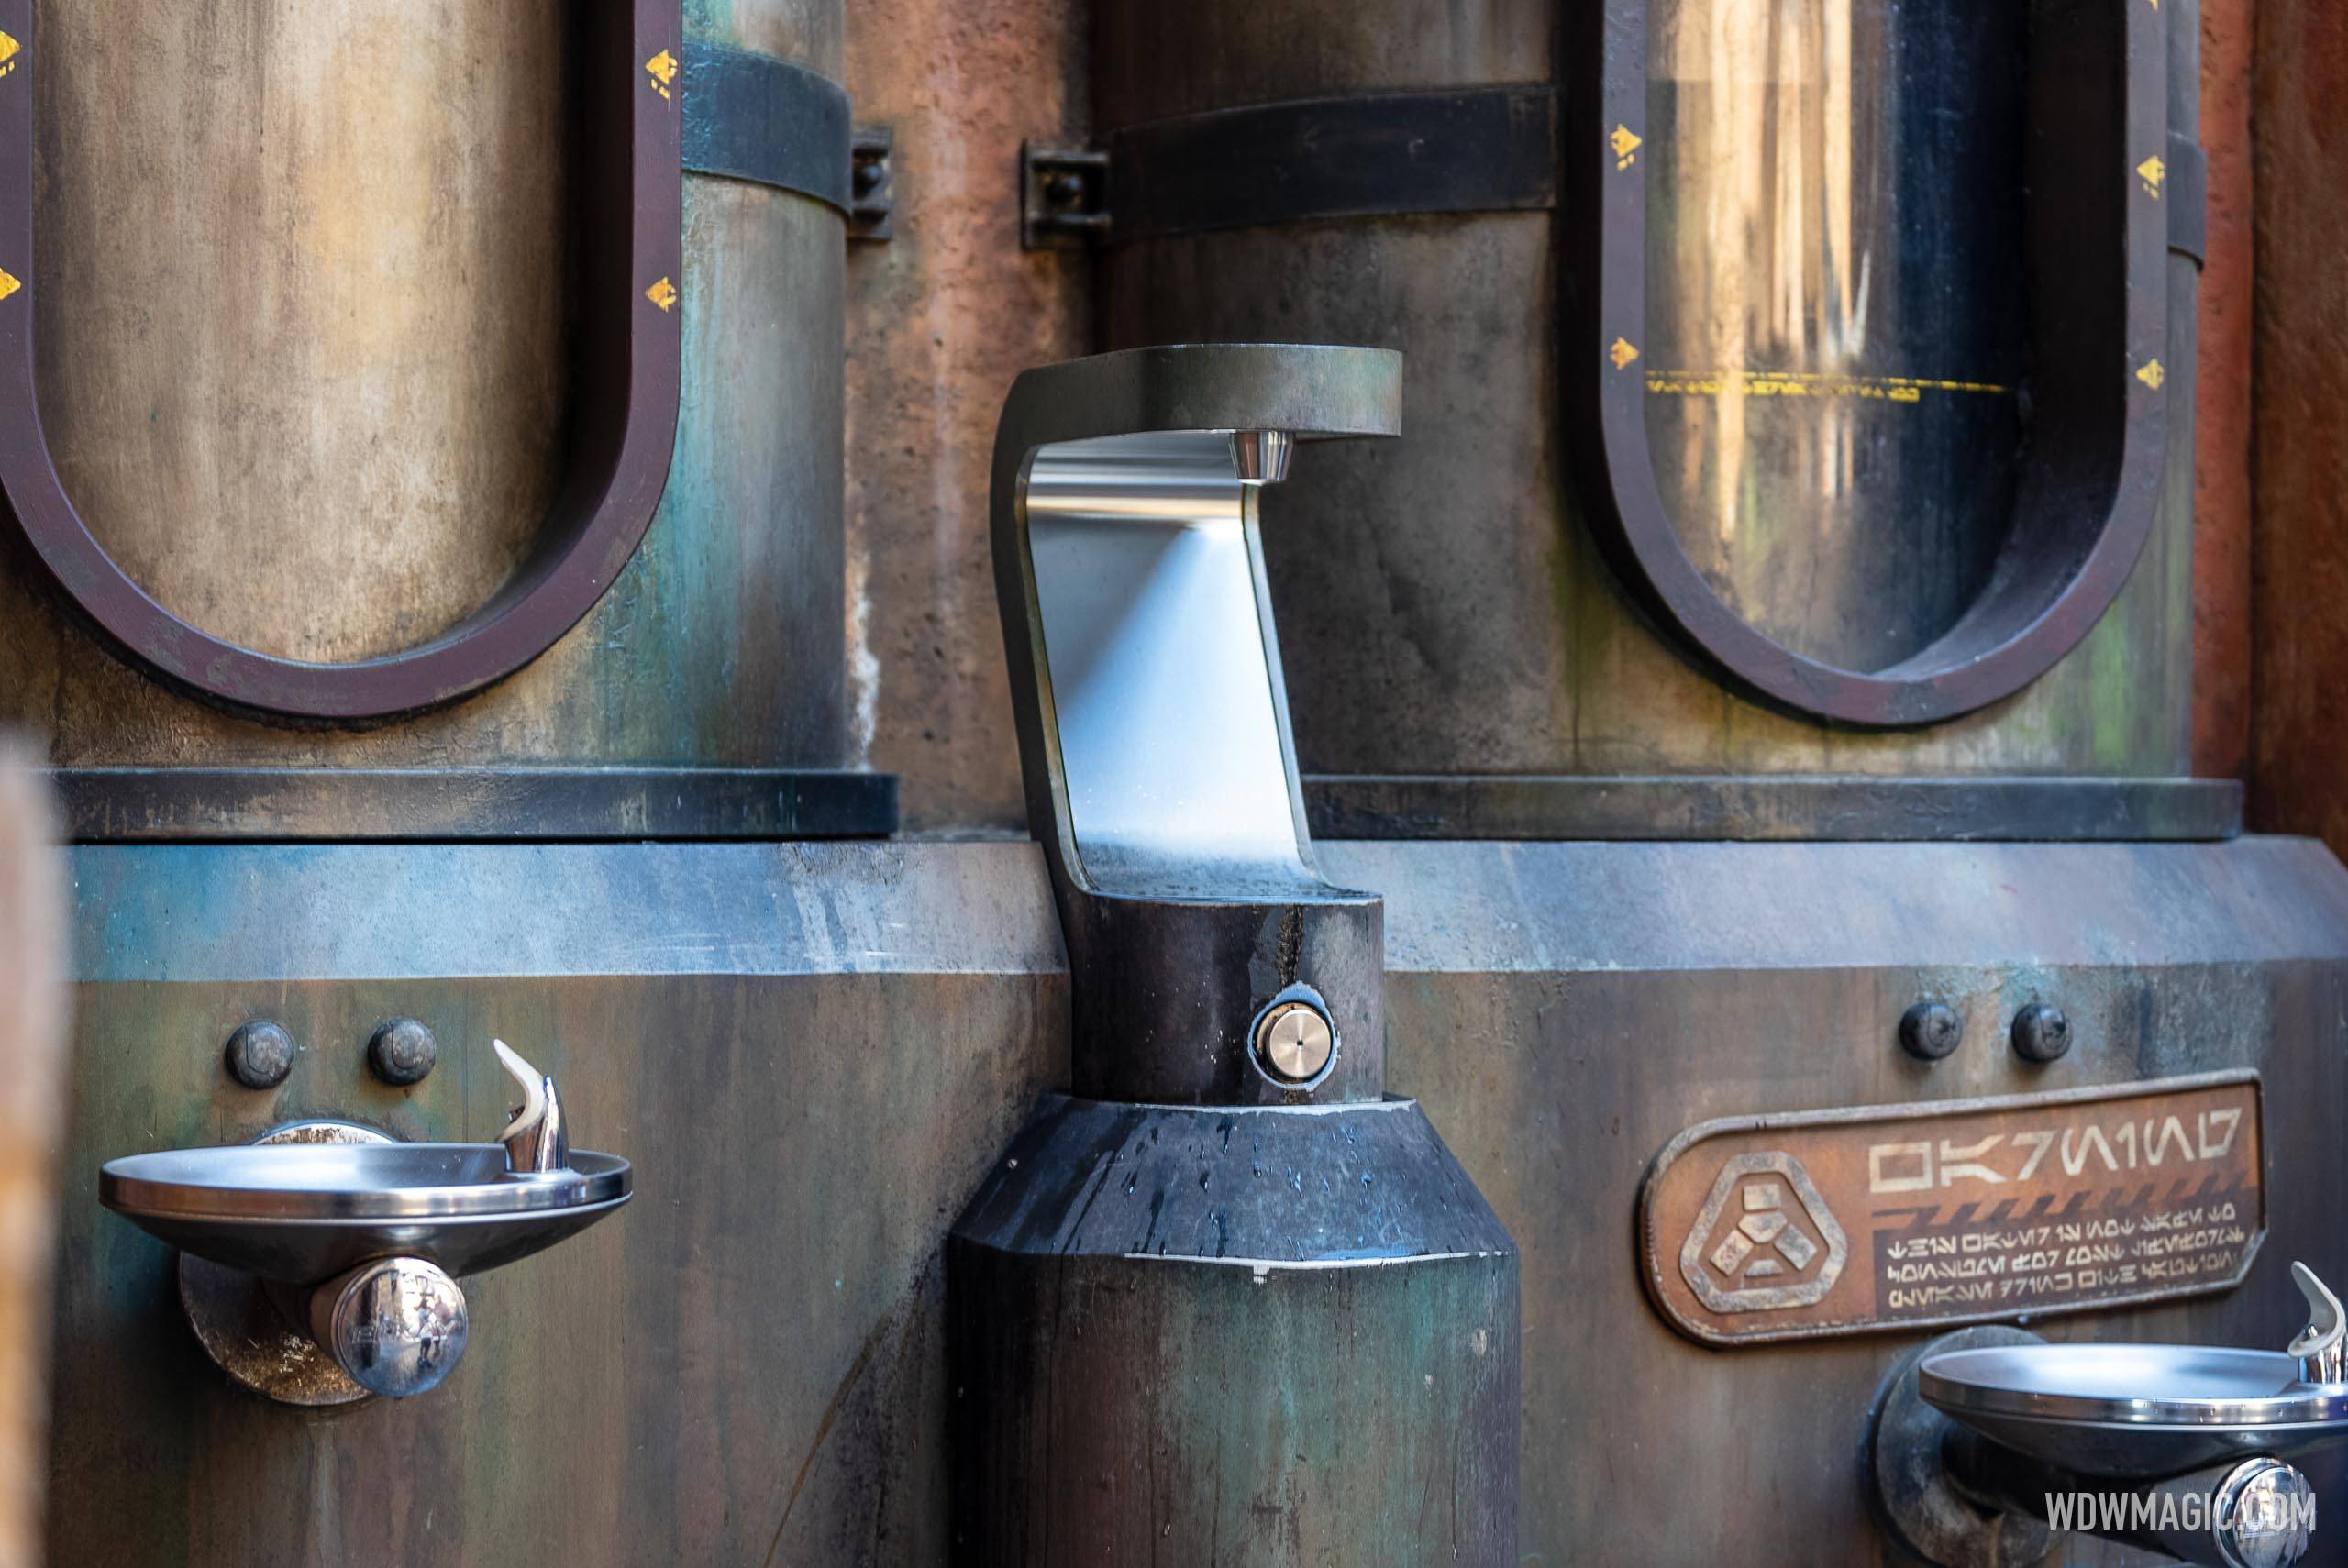 Water Bottle Refill Station in Star Wars Galaxy's Edge at Disney's Hollywood Studios